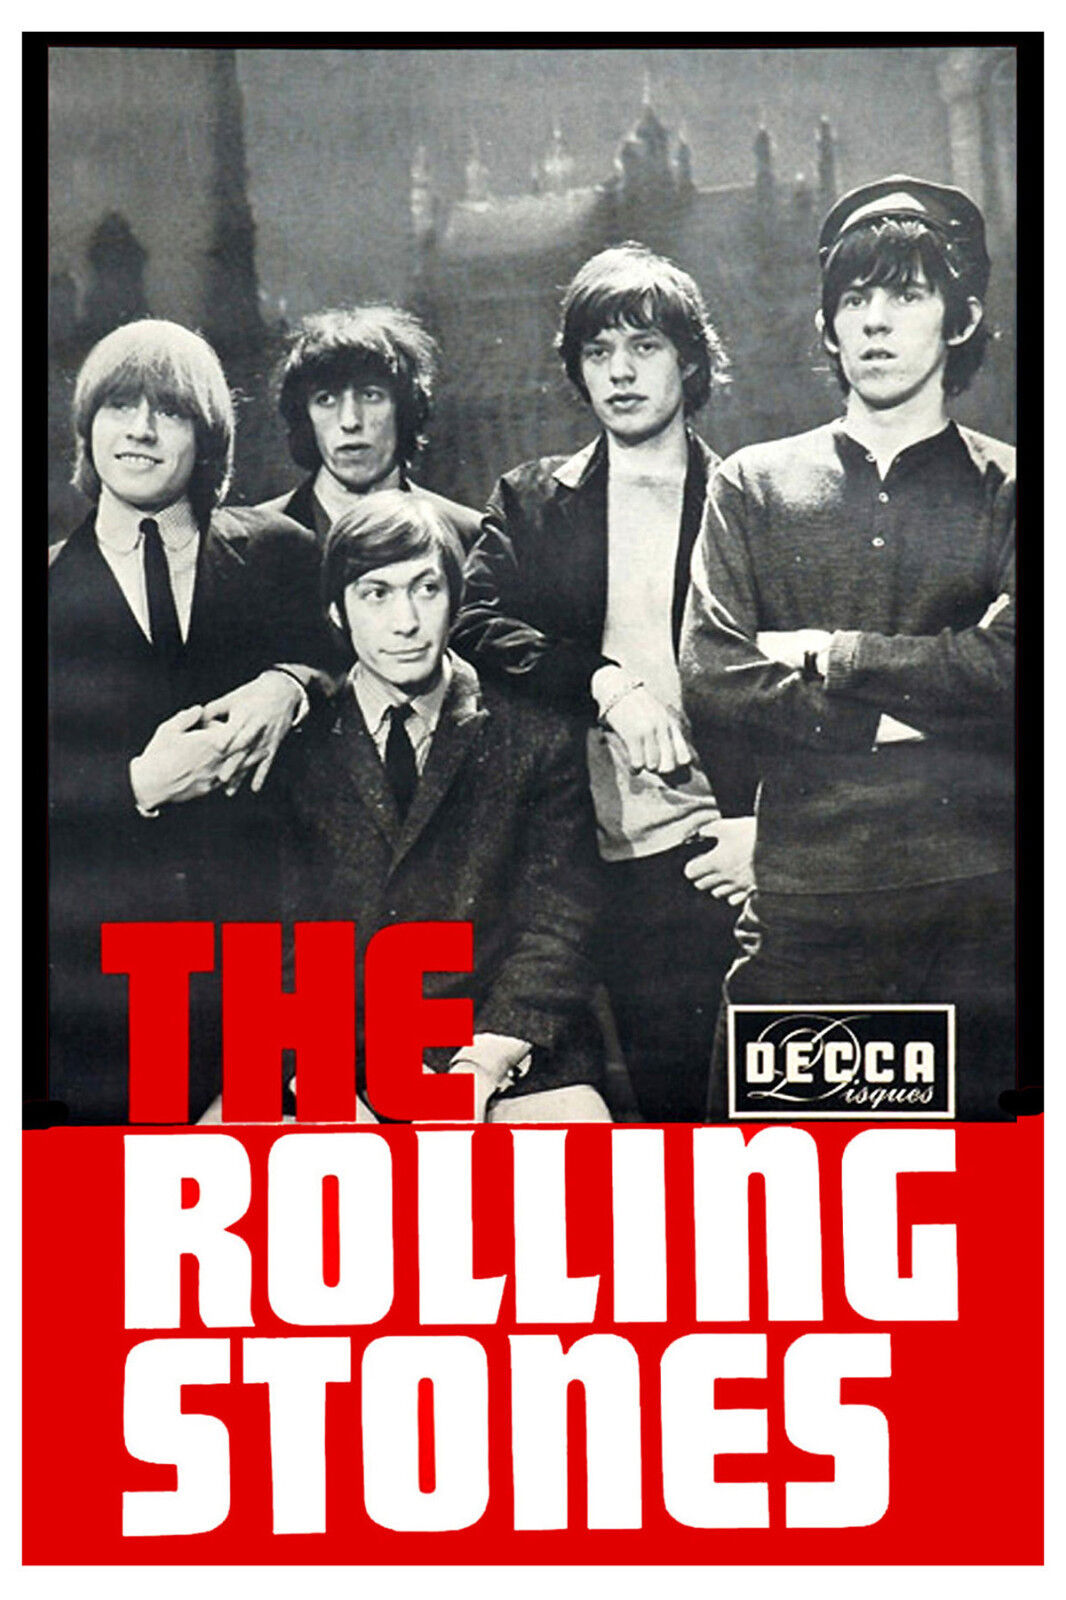 Mick Jagger & The Rolling Stones Decca Group Photo Promotional Poster 1965 13x19